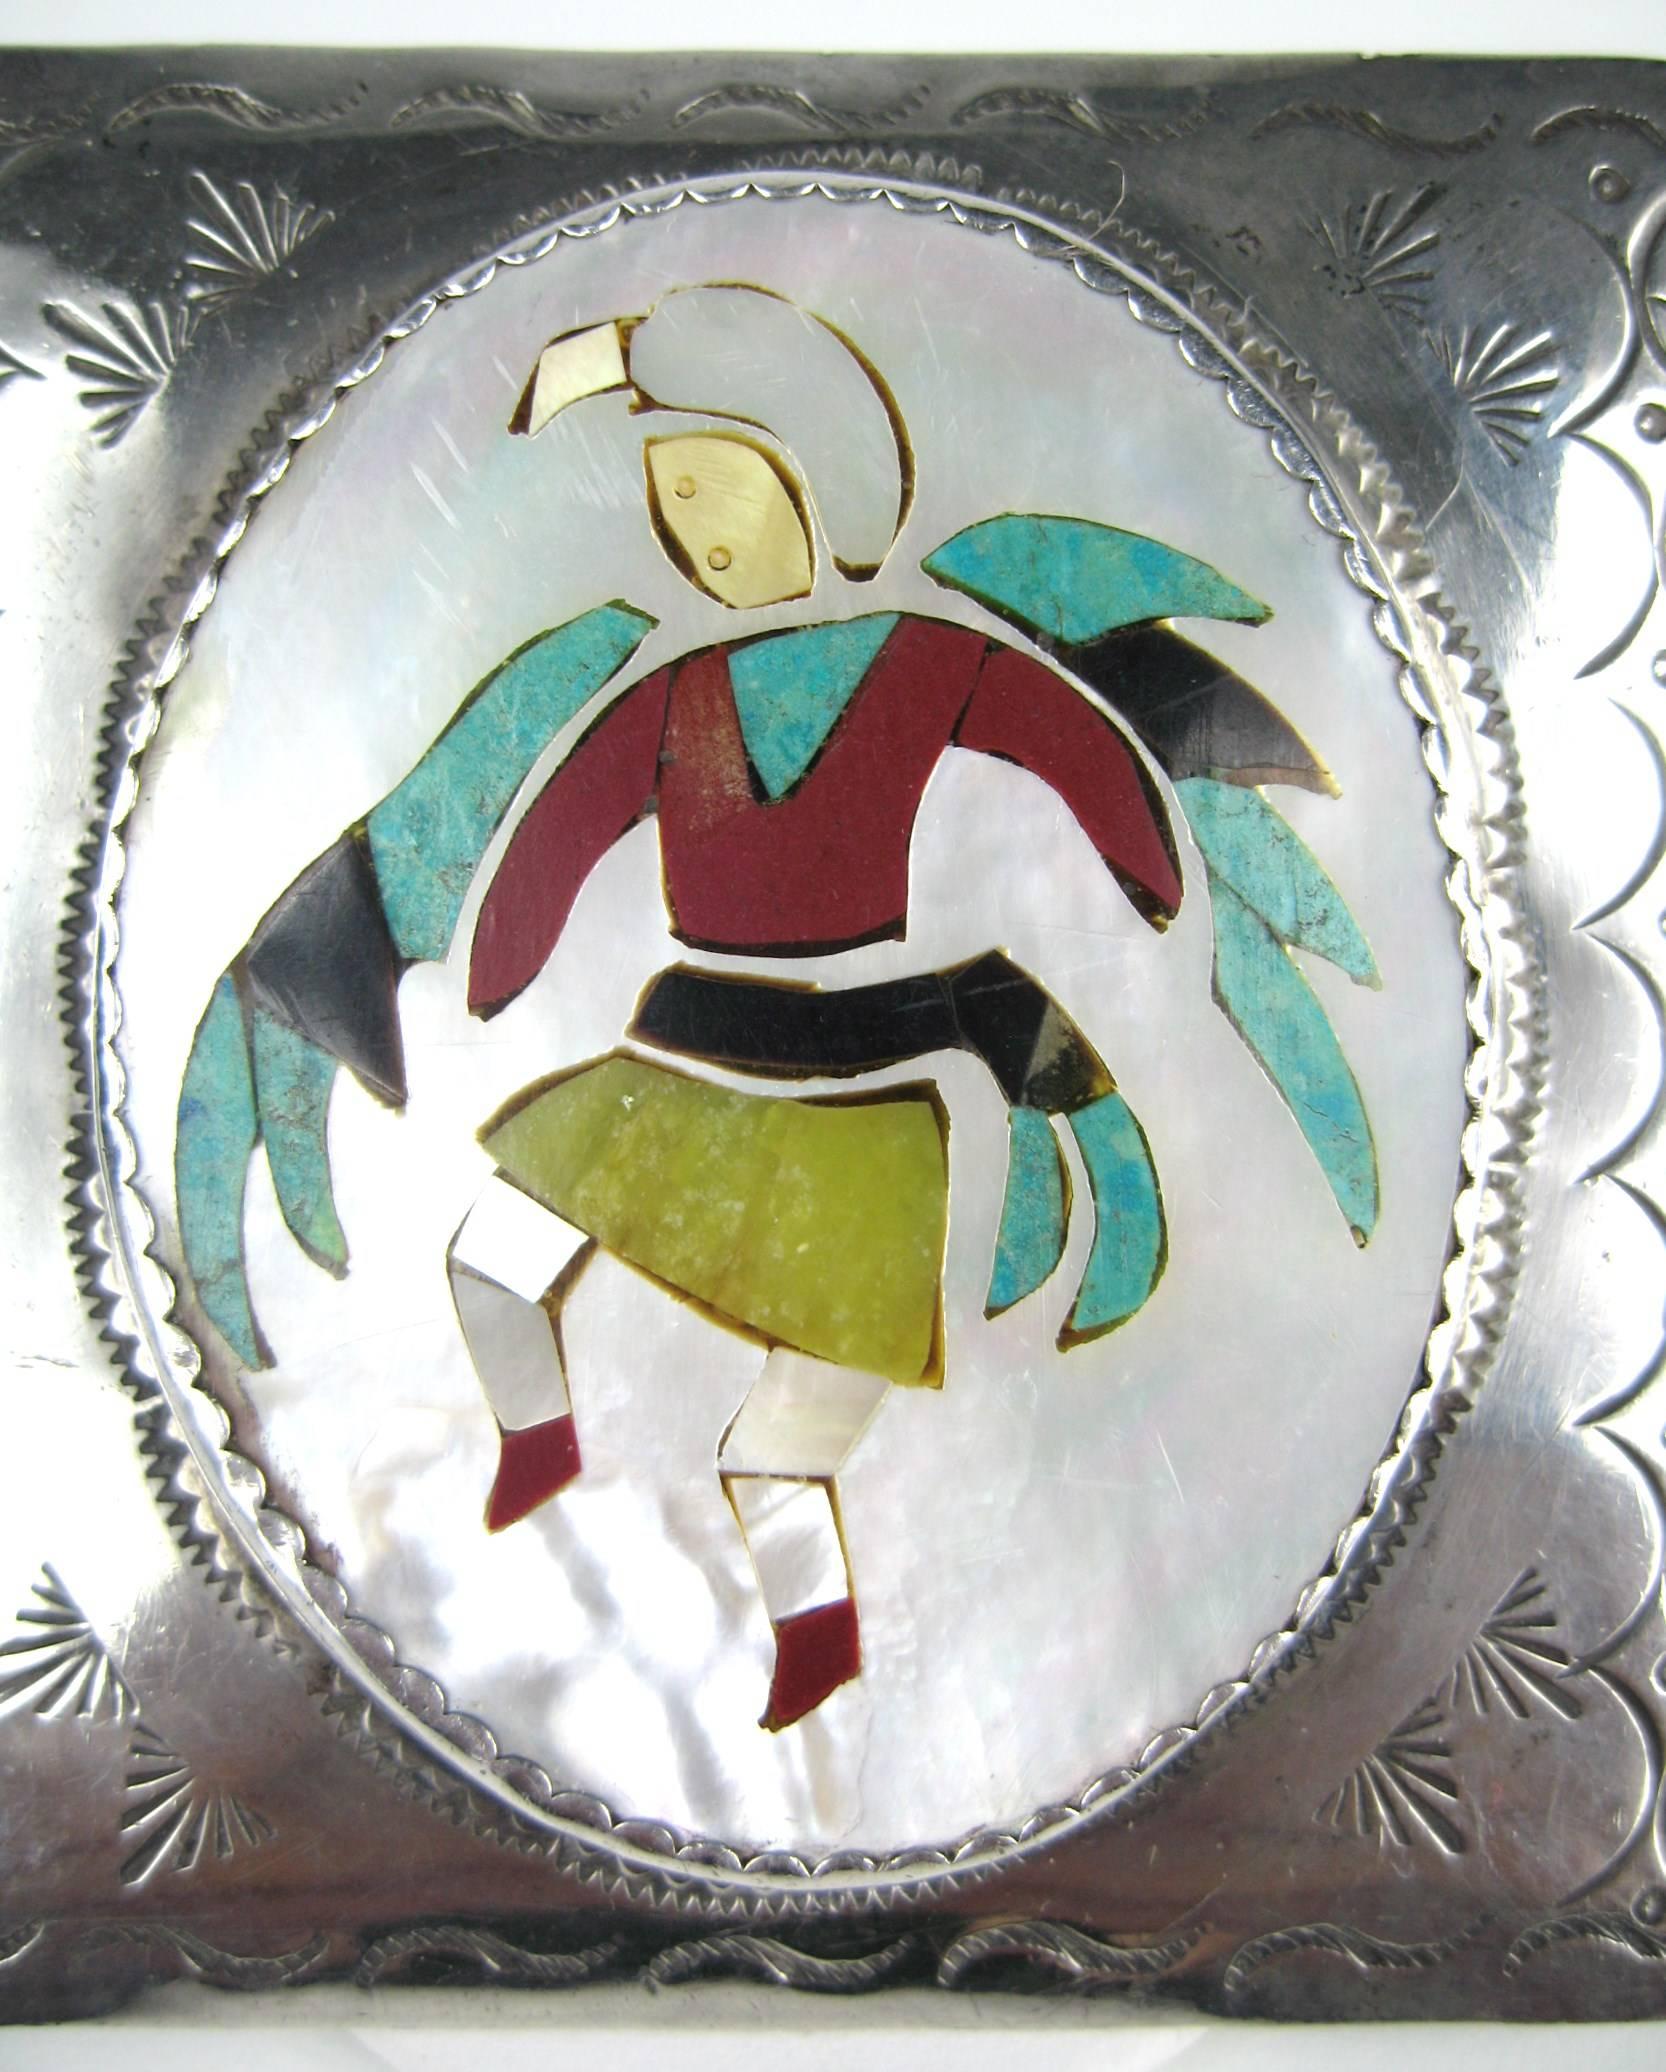 Stunning Kachina Zuni Belt Buckle with Inlaid Mother of pearl, Coral, Turquoise, Shell, Abalone. Hallmarked on the back side. Measuring 2.75 in x 3.00 in. wide. This is out of a massive collection of Hopi, Zuni, Navajo, Southwestern, sterling